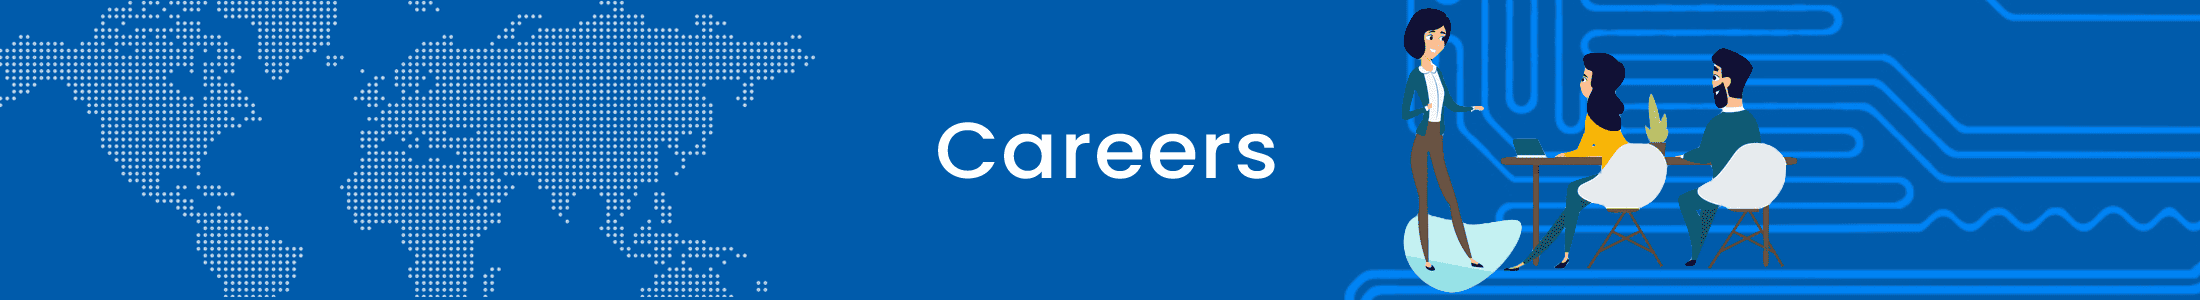 Careers Banner